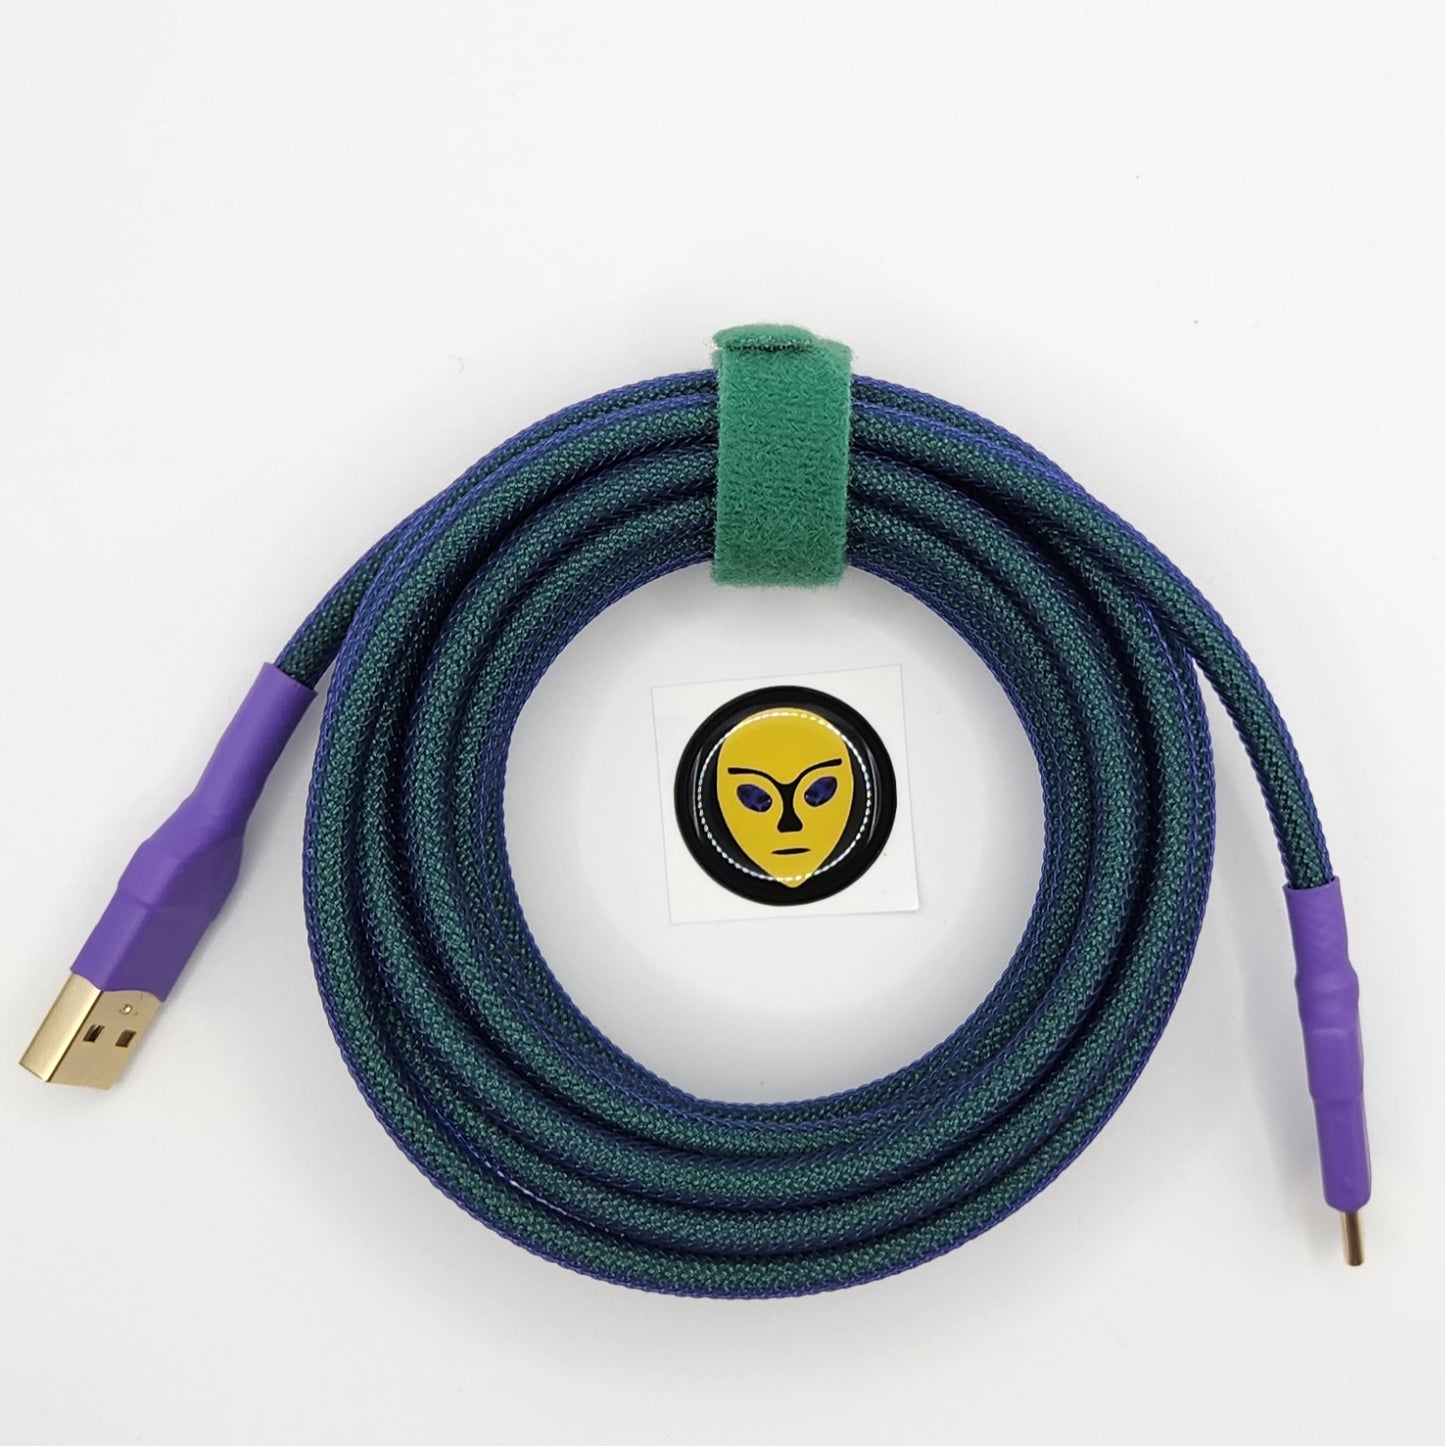 USB Cable &amp; Premade Coiled USB Cable 